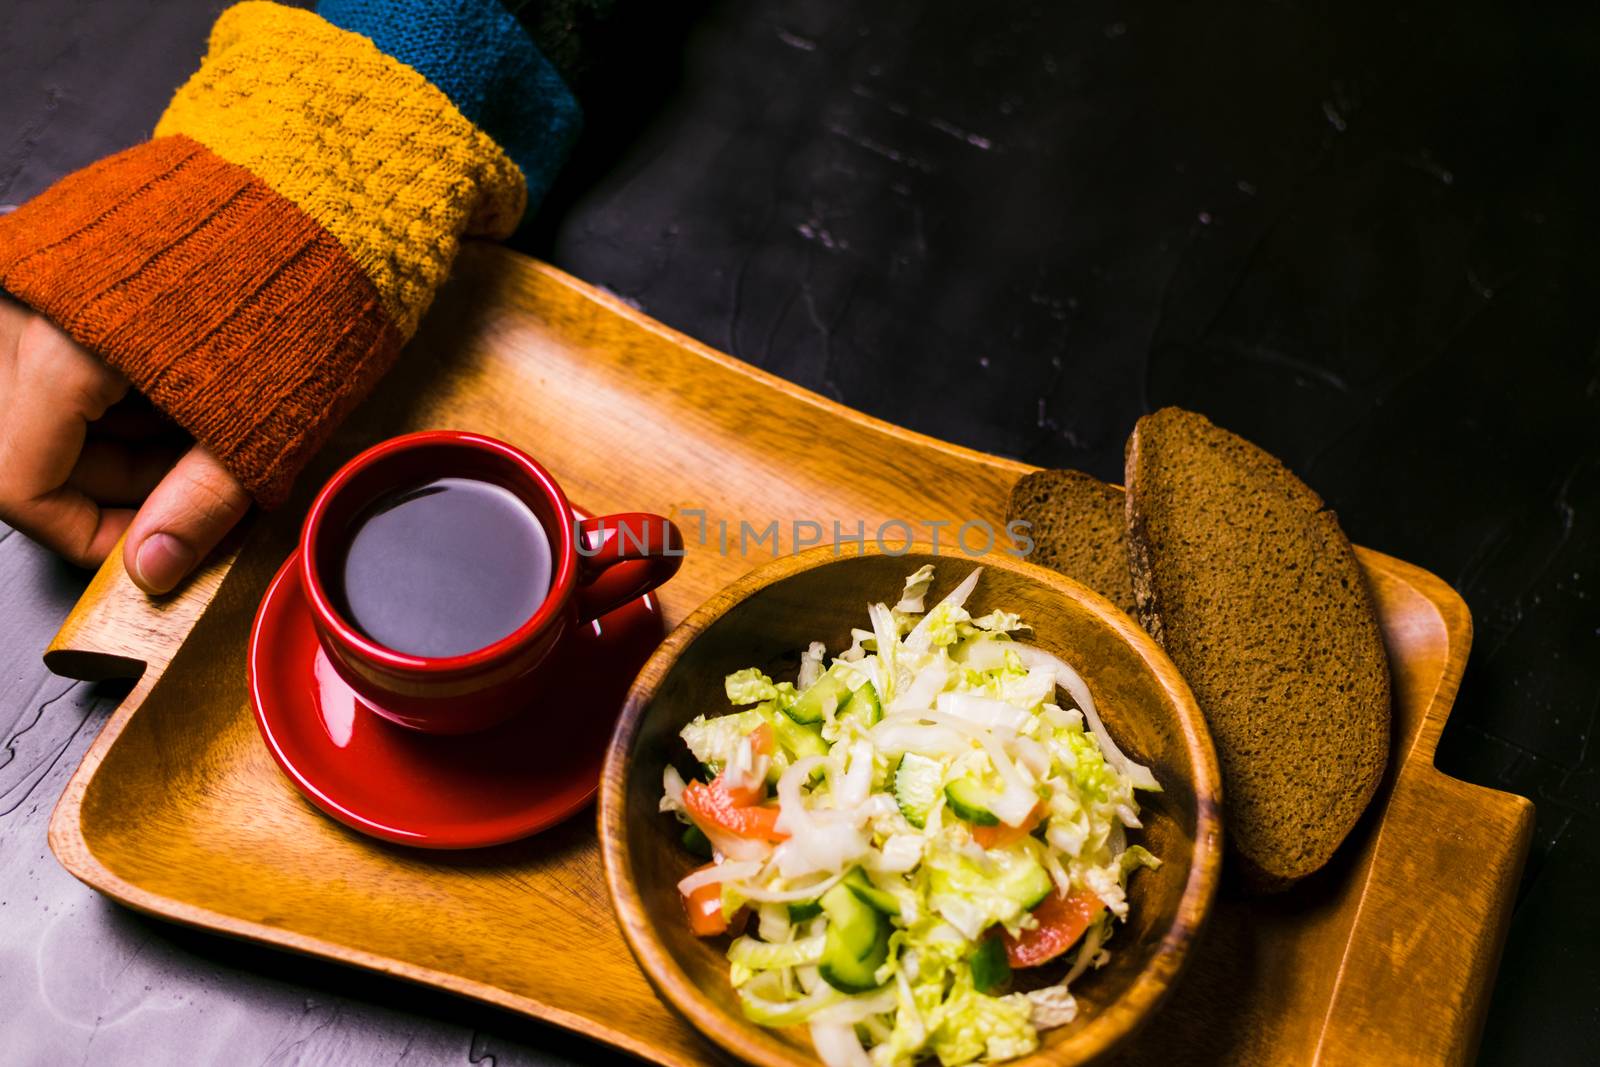 Man holding wooden tray with a salad and coffee on a black background